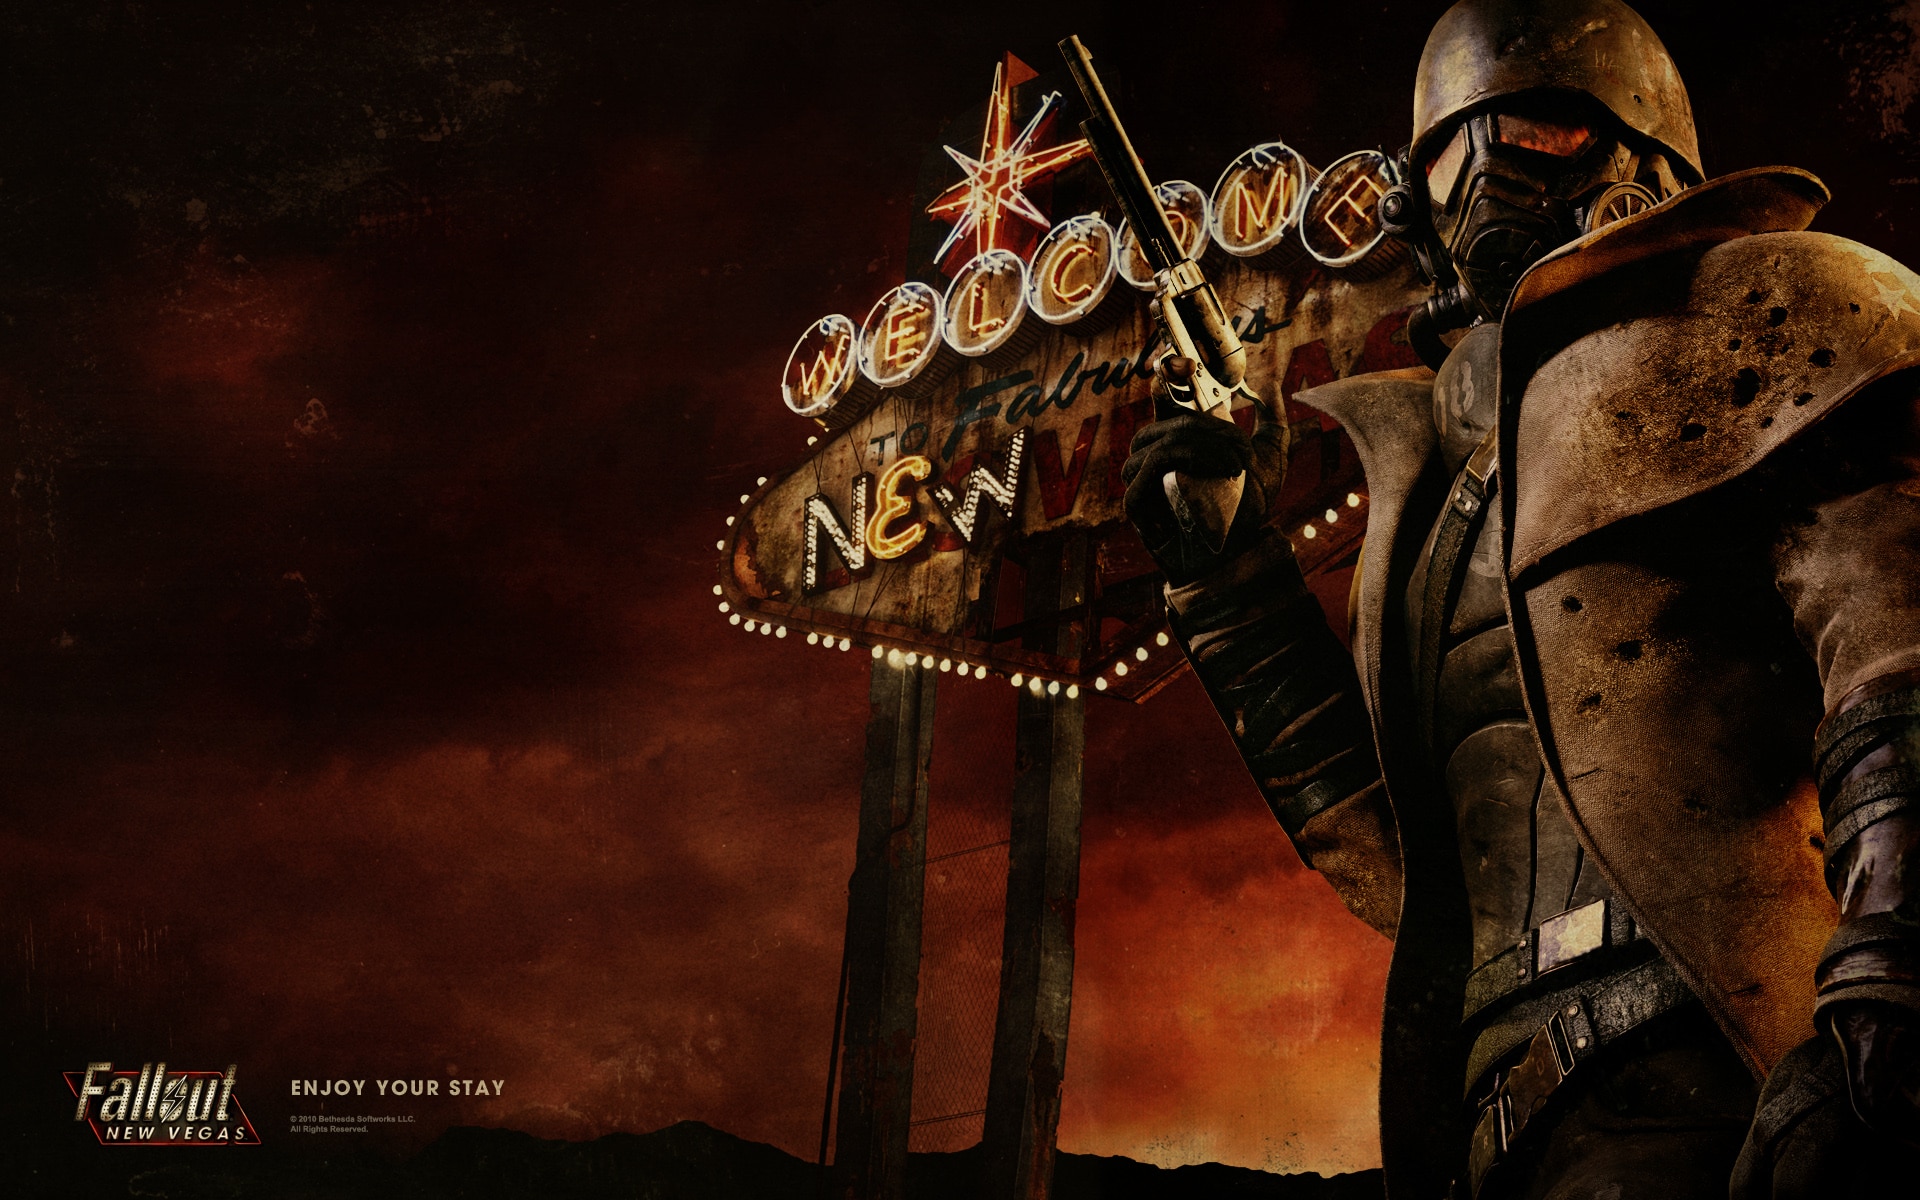 Fallout: New Vegas gets playable Enclave faction thanks to mod